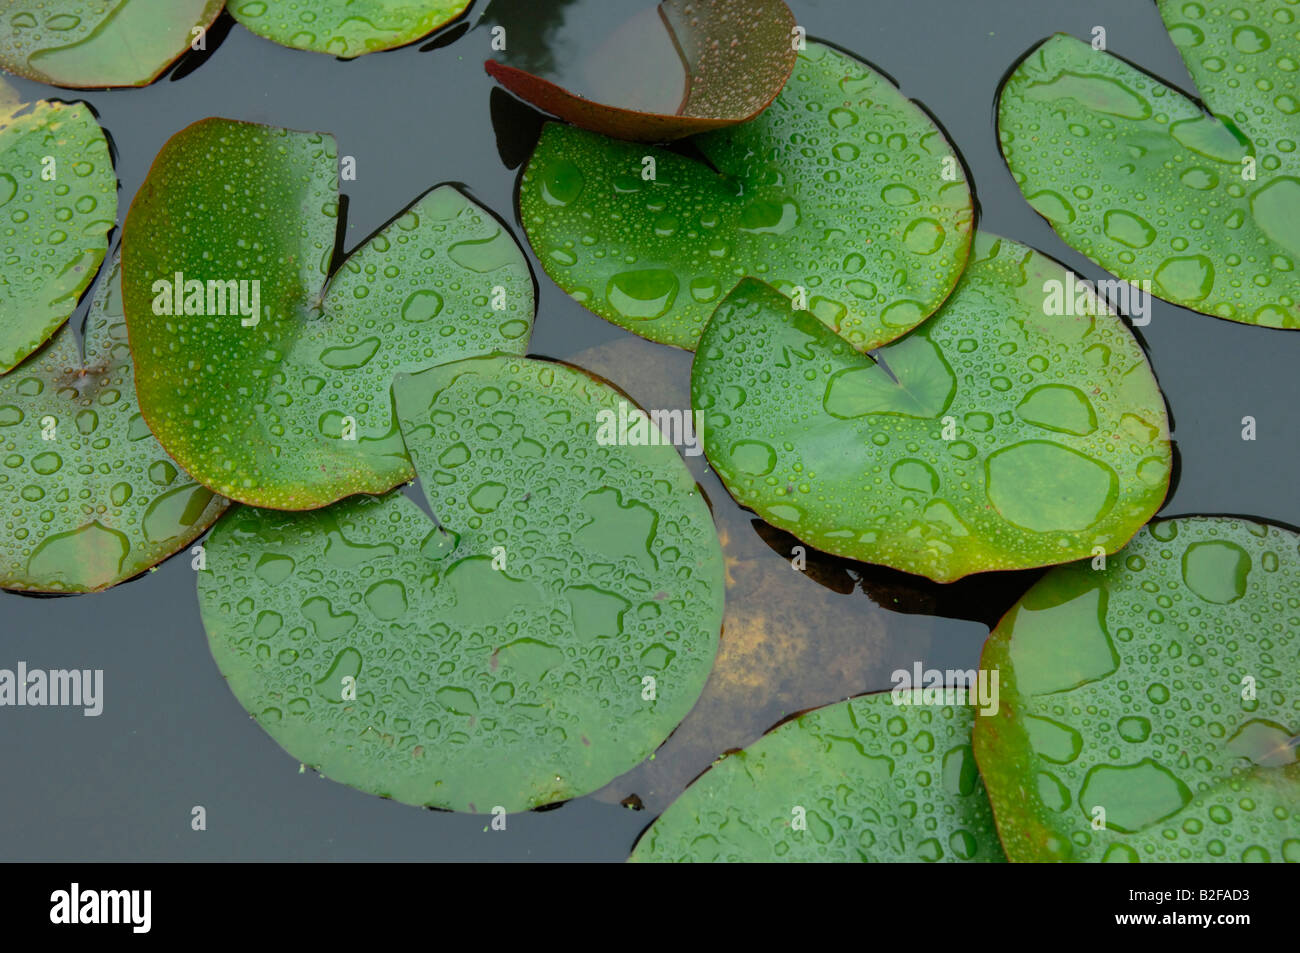 Water lily leaves on a garden pond in the rain in summer Stock Photo